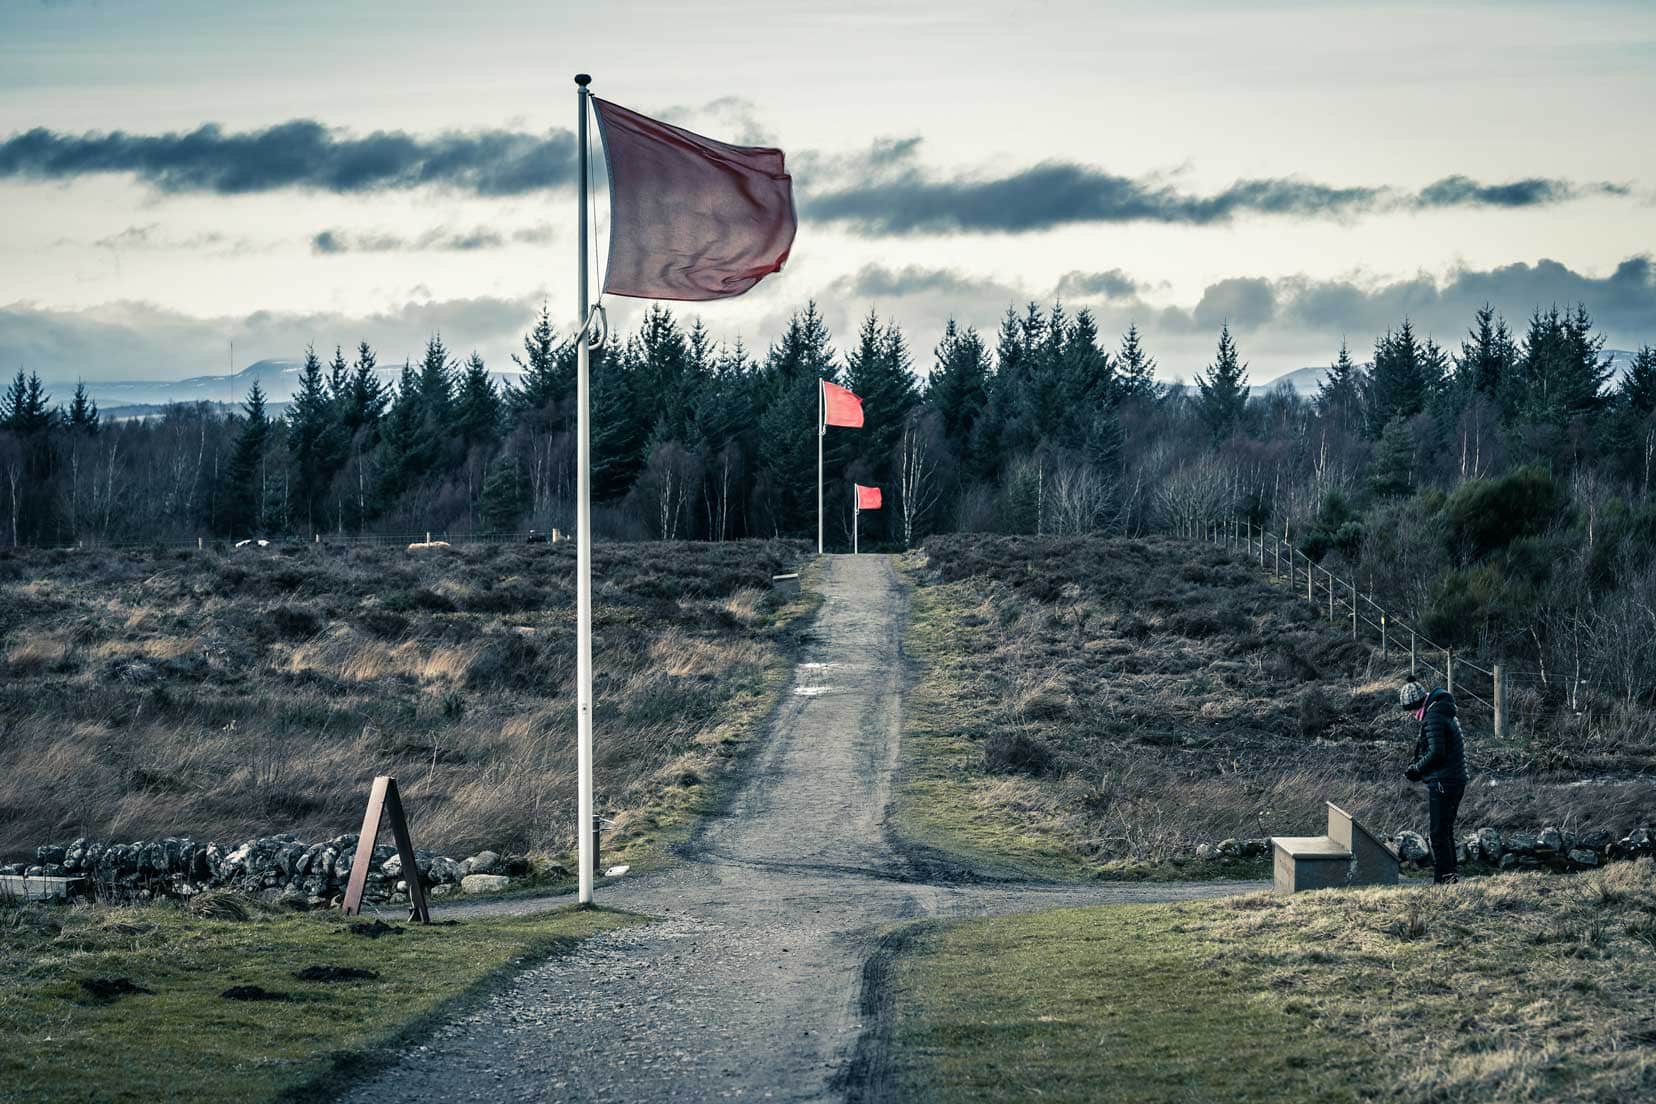 Culloden Battlefield - long path through moorlans with pine trees i the backgroundand red flags on poles speced out beside the path. Shelley is reading a sign to the left